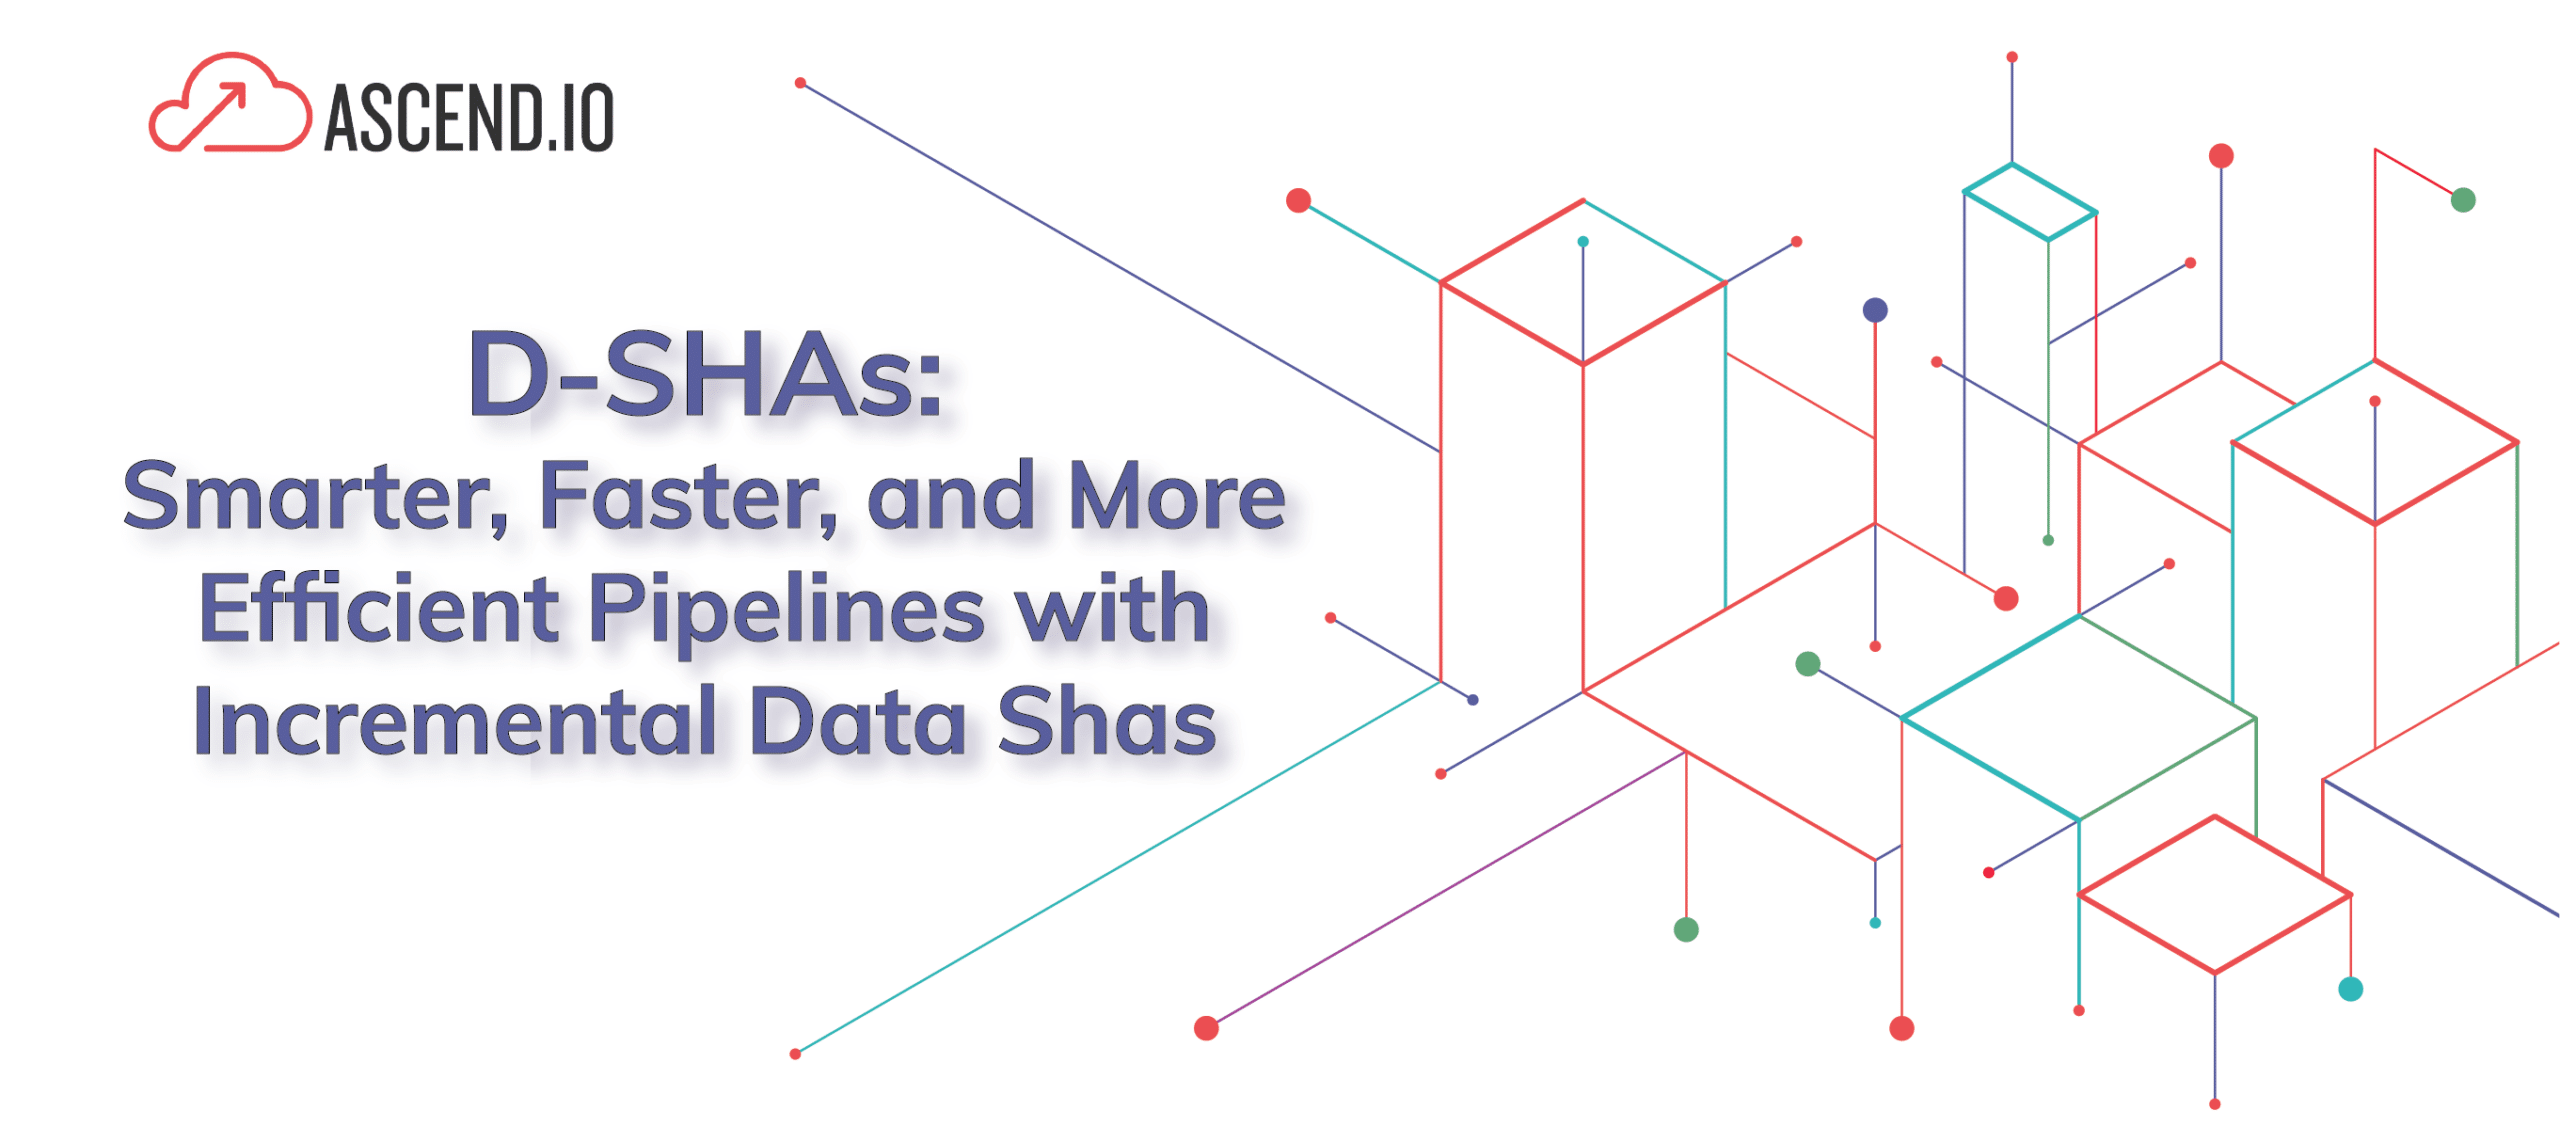 D-SHAs: Smarter, Faster, and More Efficient Pipelines with Incremental Data Shas